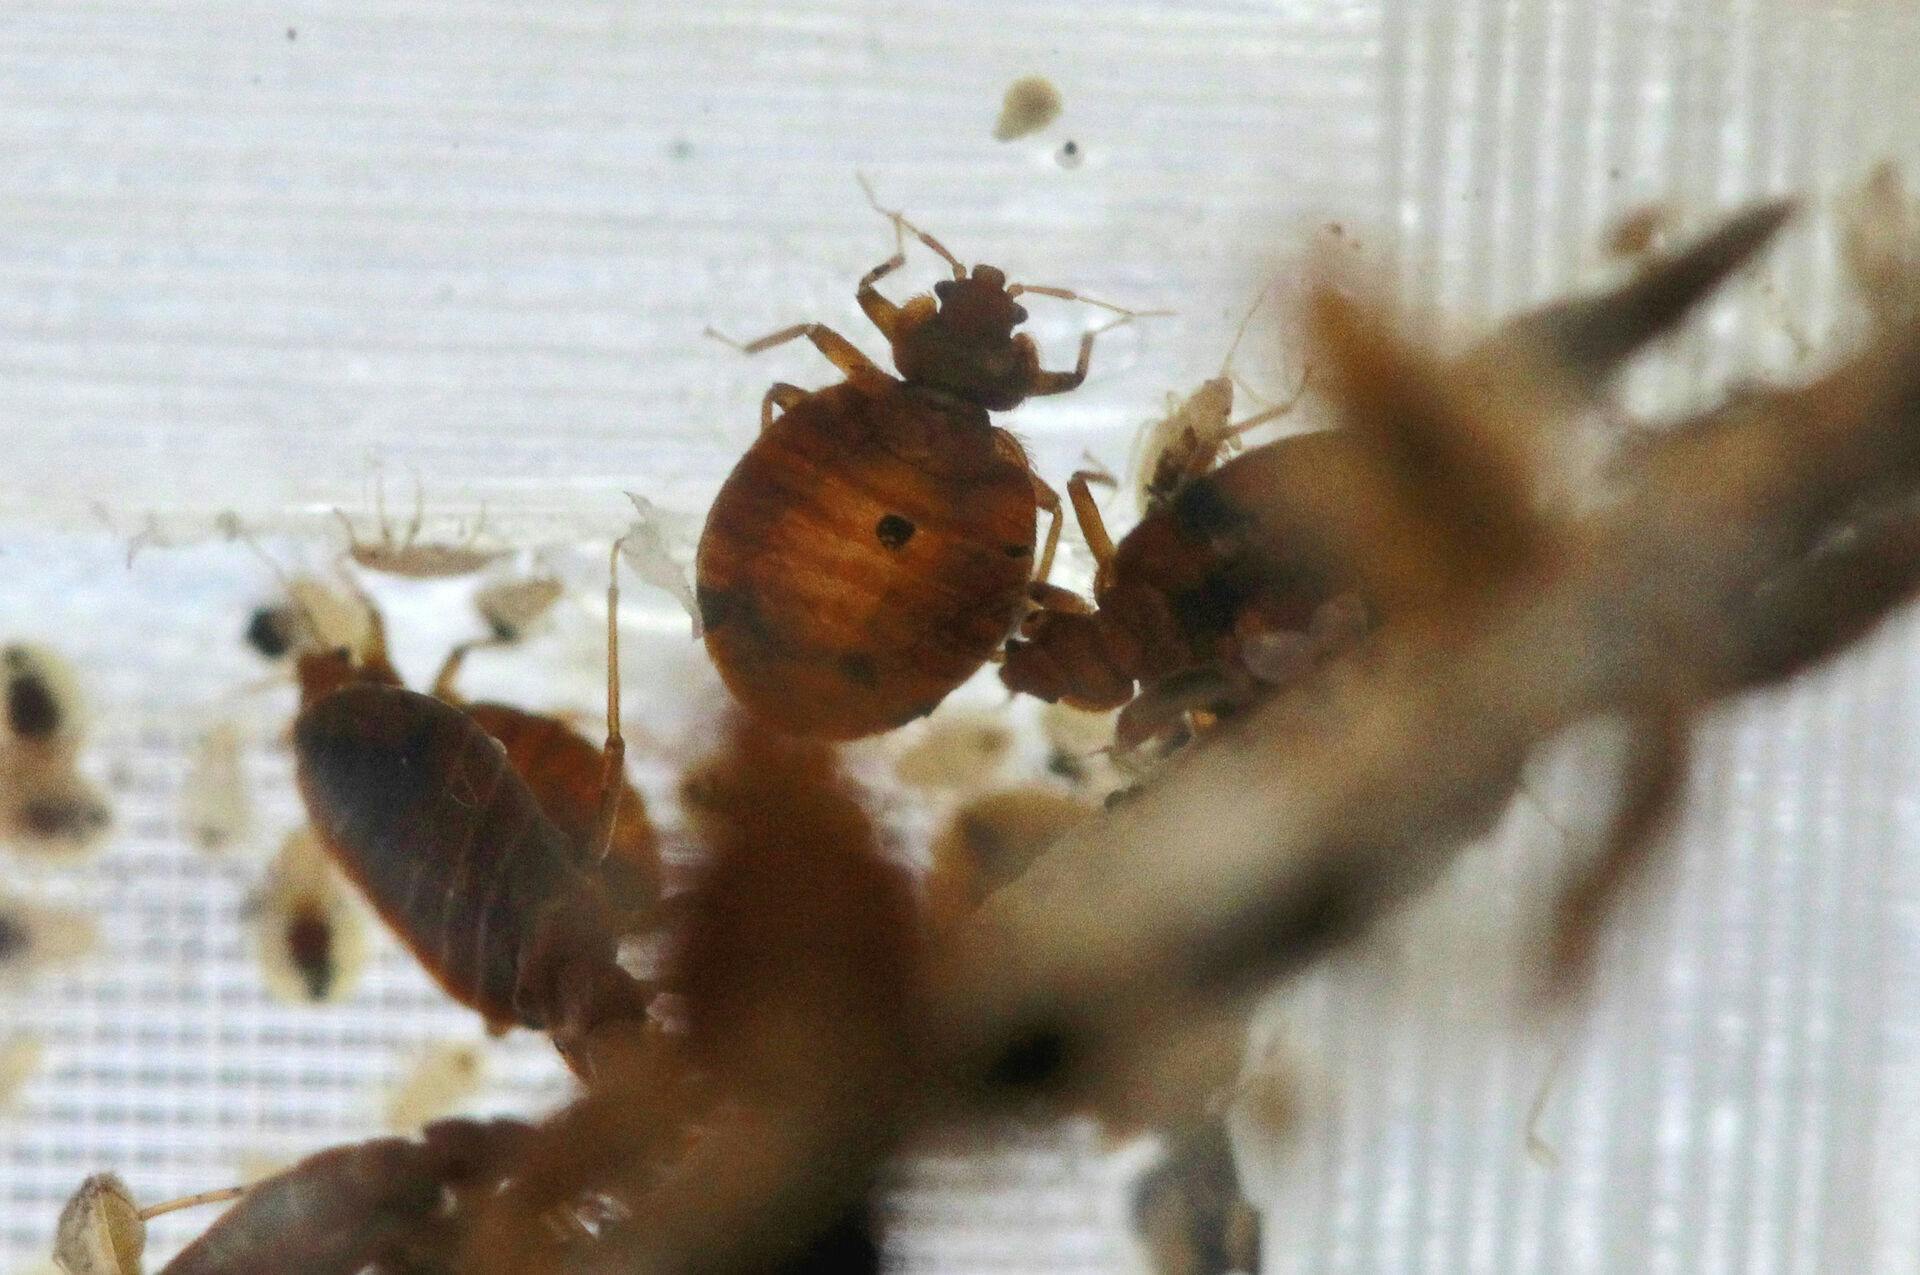 Bedbugs are seen in a container from the lab at the National Pest Management Association, during the National Bed Bug Summit in Washington, Tuesday, Feb. 1, 2011. (AP Photo/Alex Brandon)